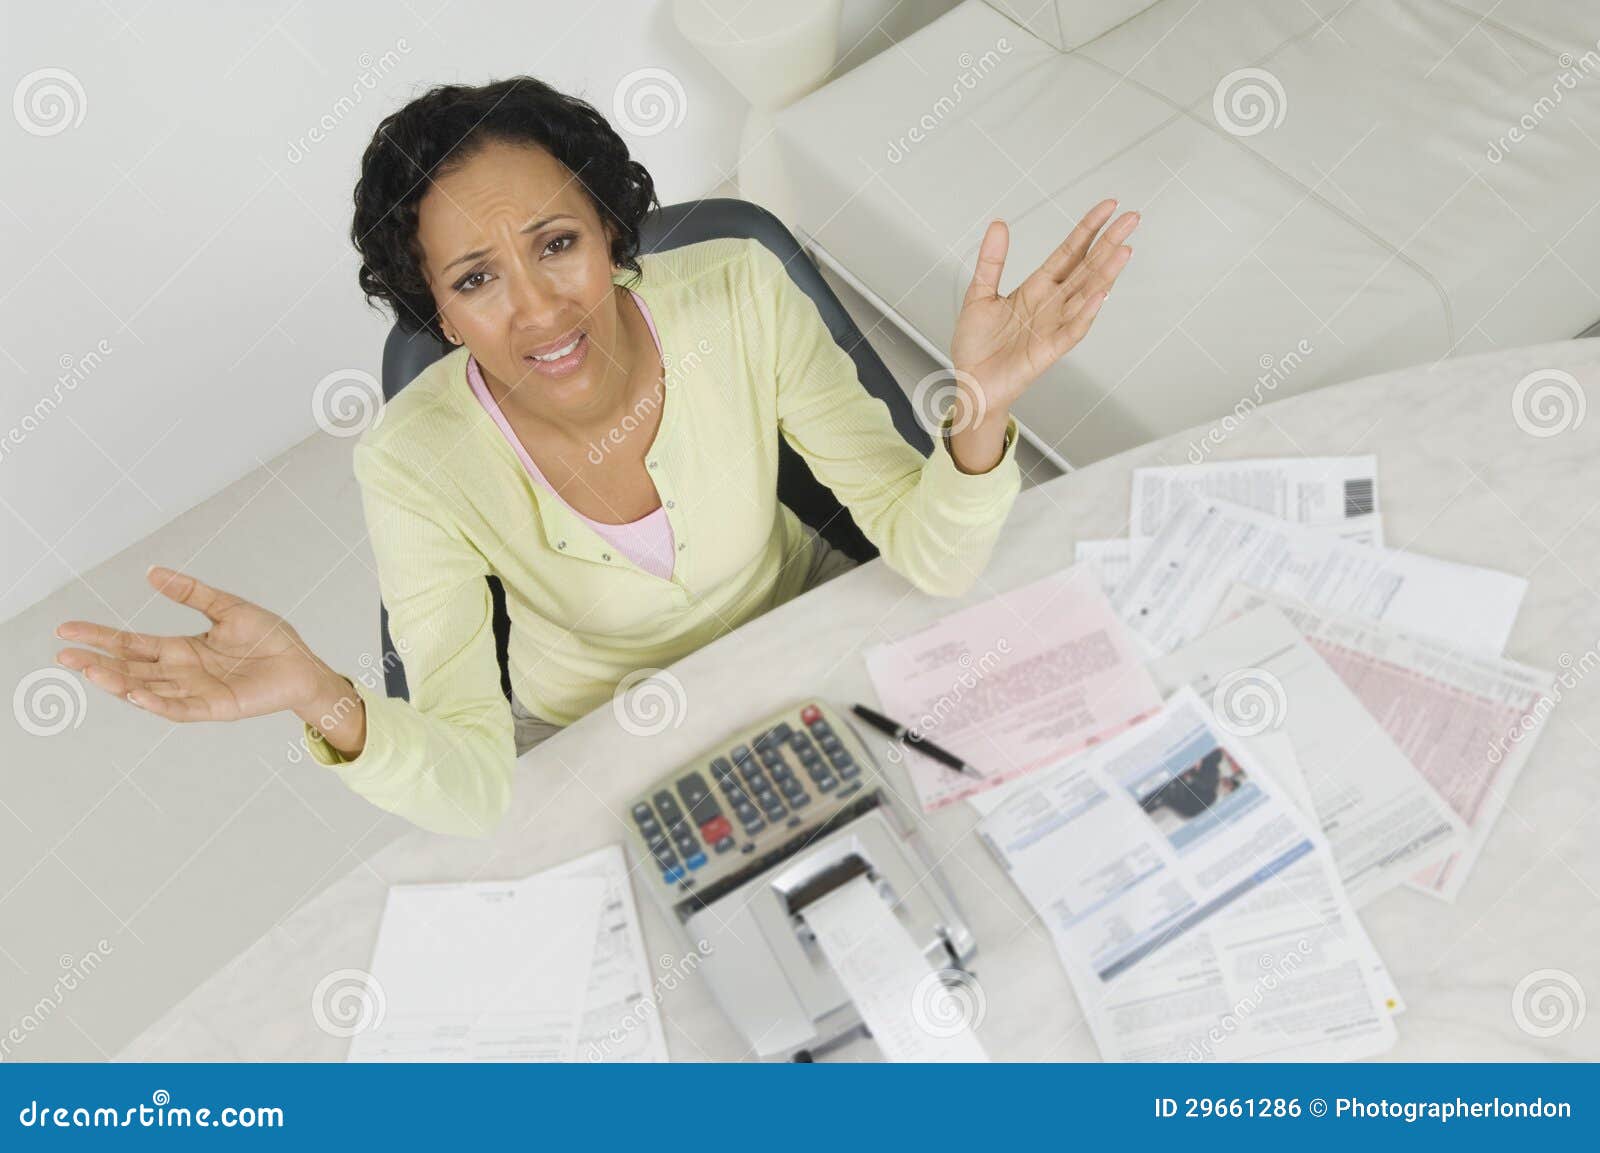 woman with documents and expense receipt